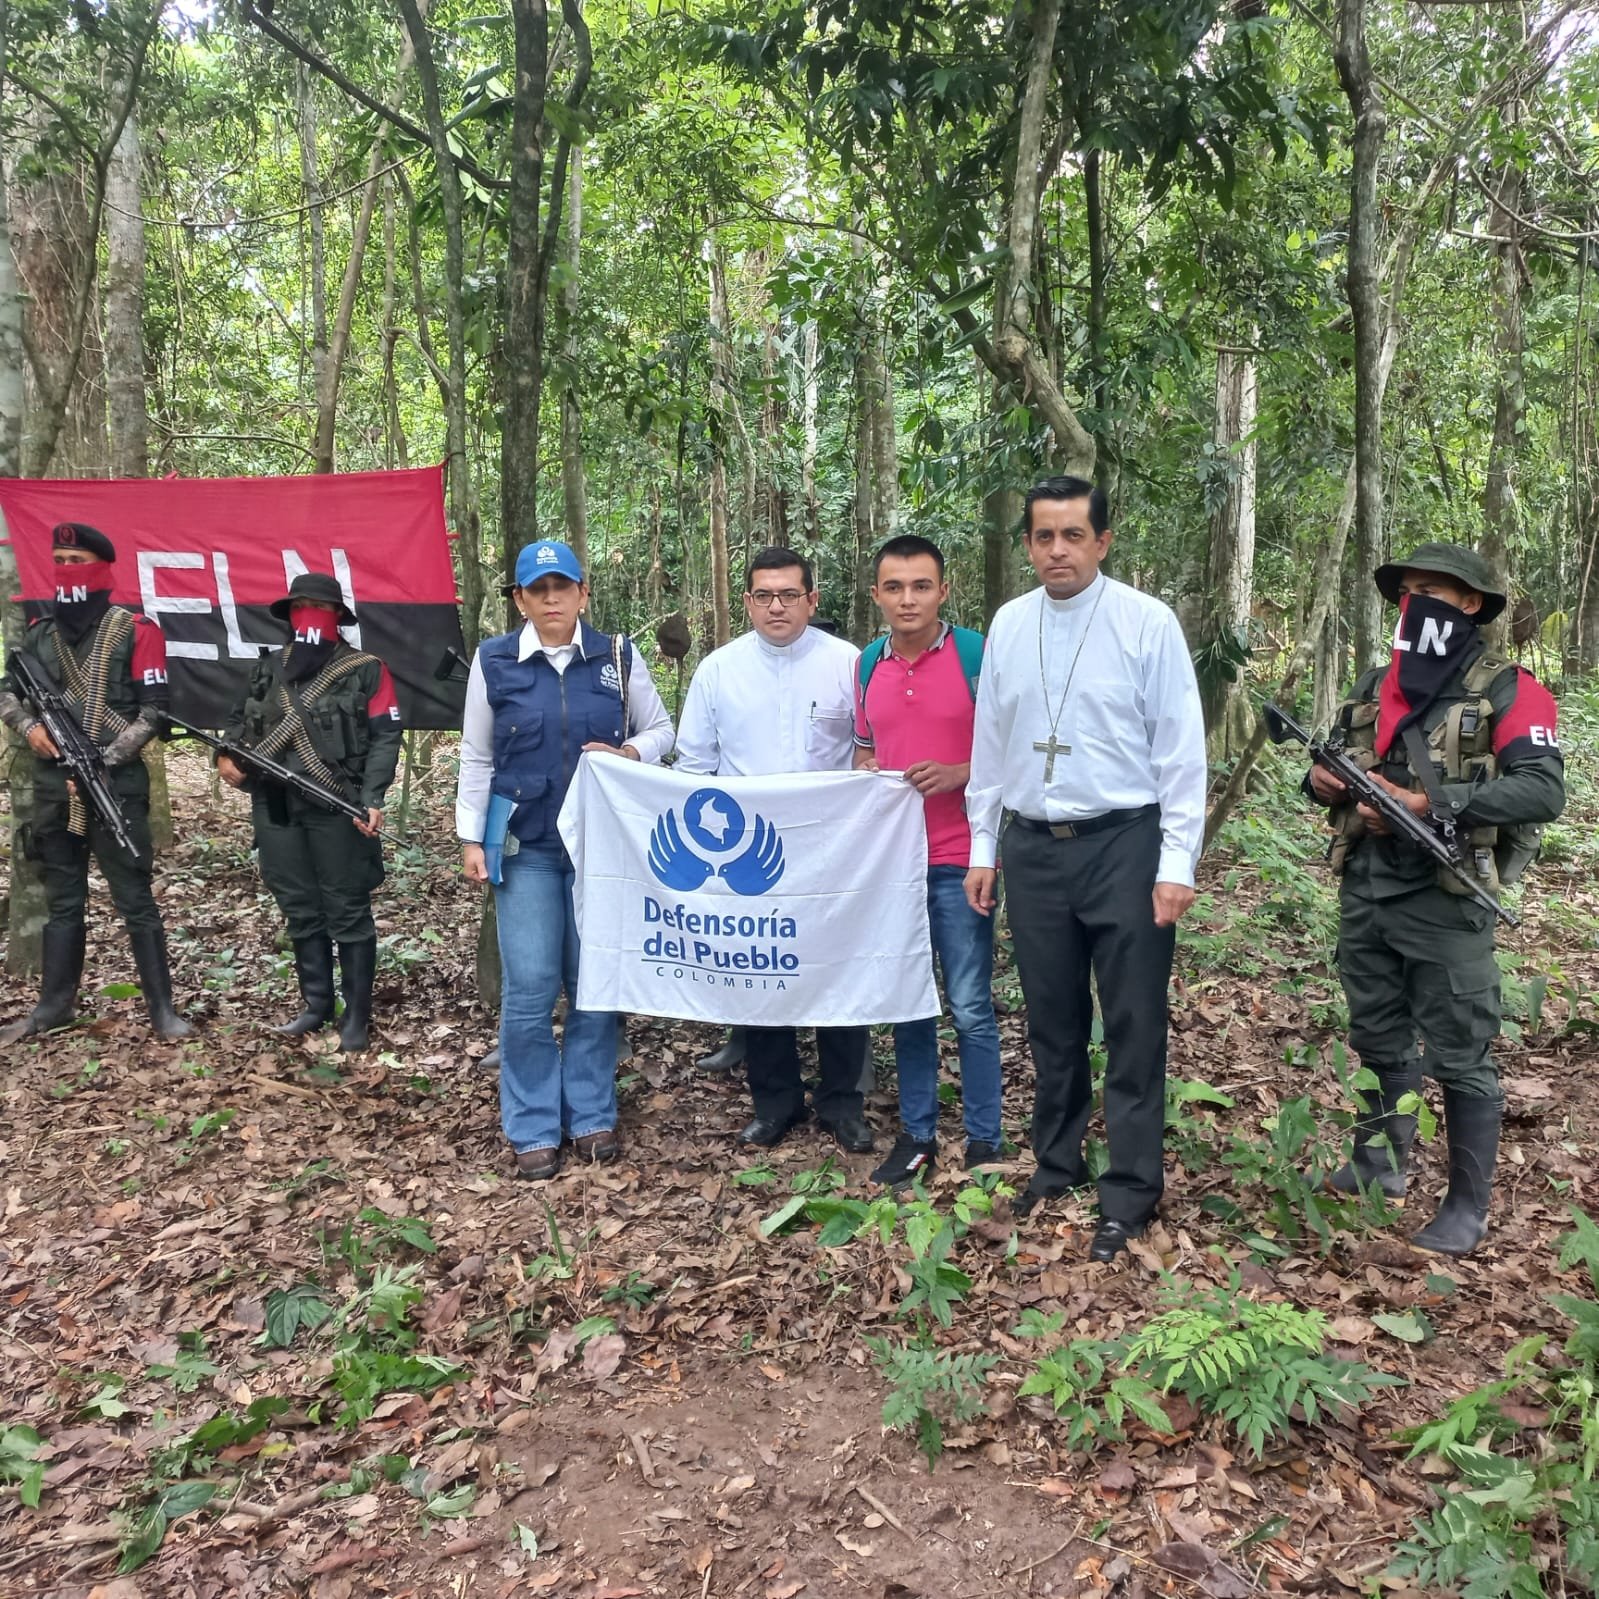 The Eastern Front of the National Liberation Army (ELN) Releases 17-Year-Old Brayan Camilo Carrillo Flores, Arauca, Colombia - 29 May 2023